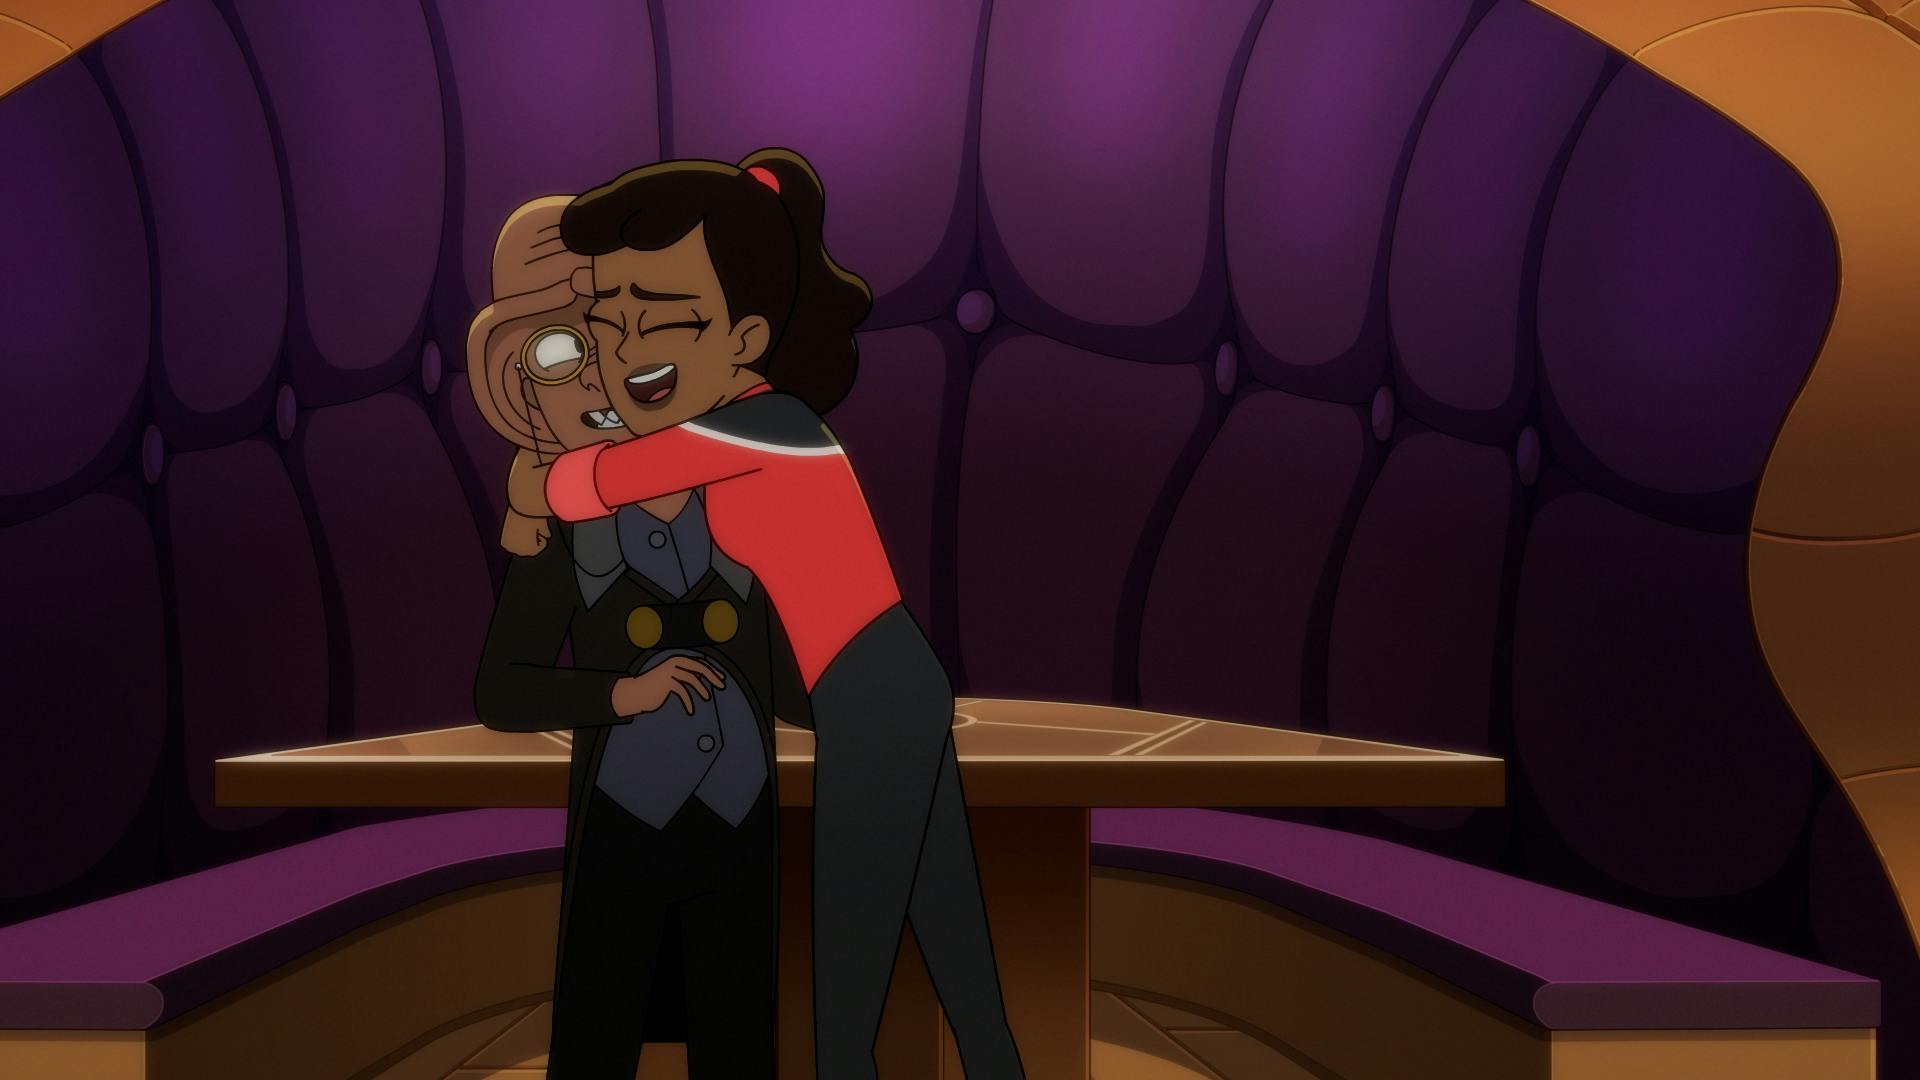 Mariner hugs Quimp in front of a purple plush booth in 'Parth Ferengi's Heart Place'